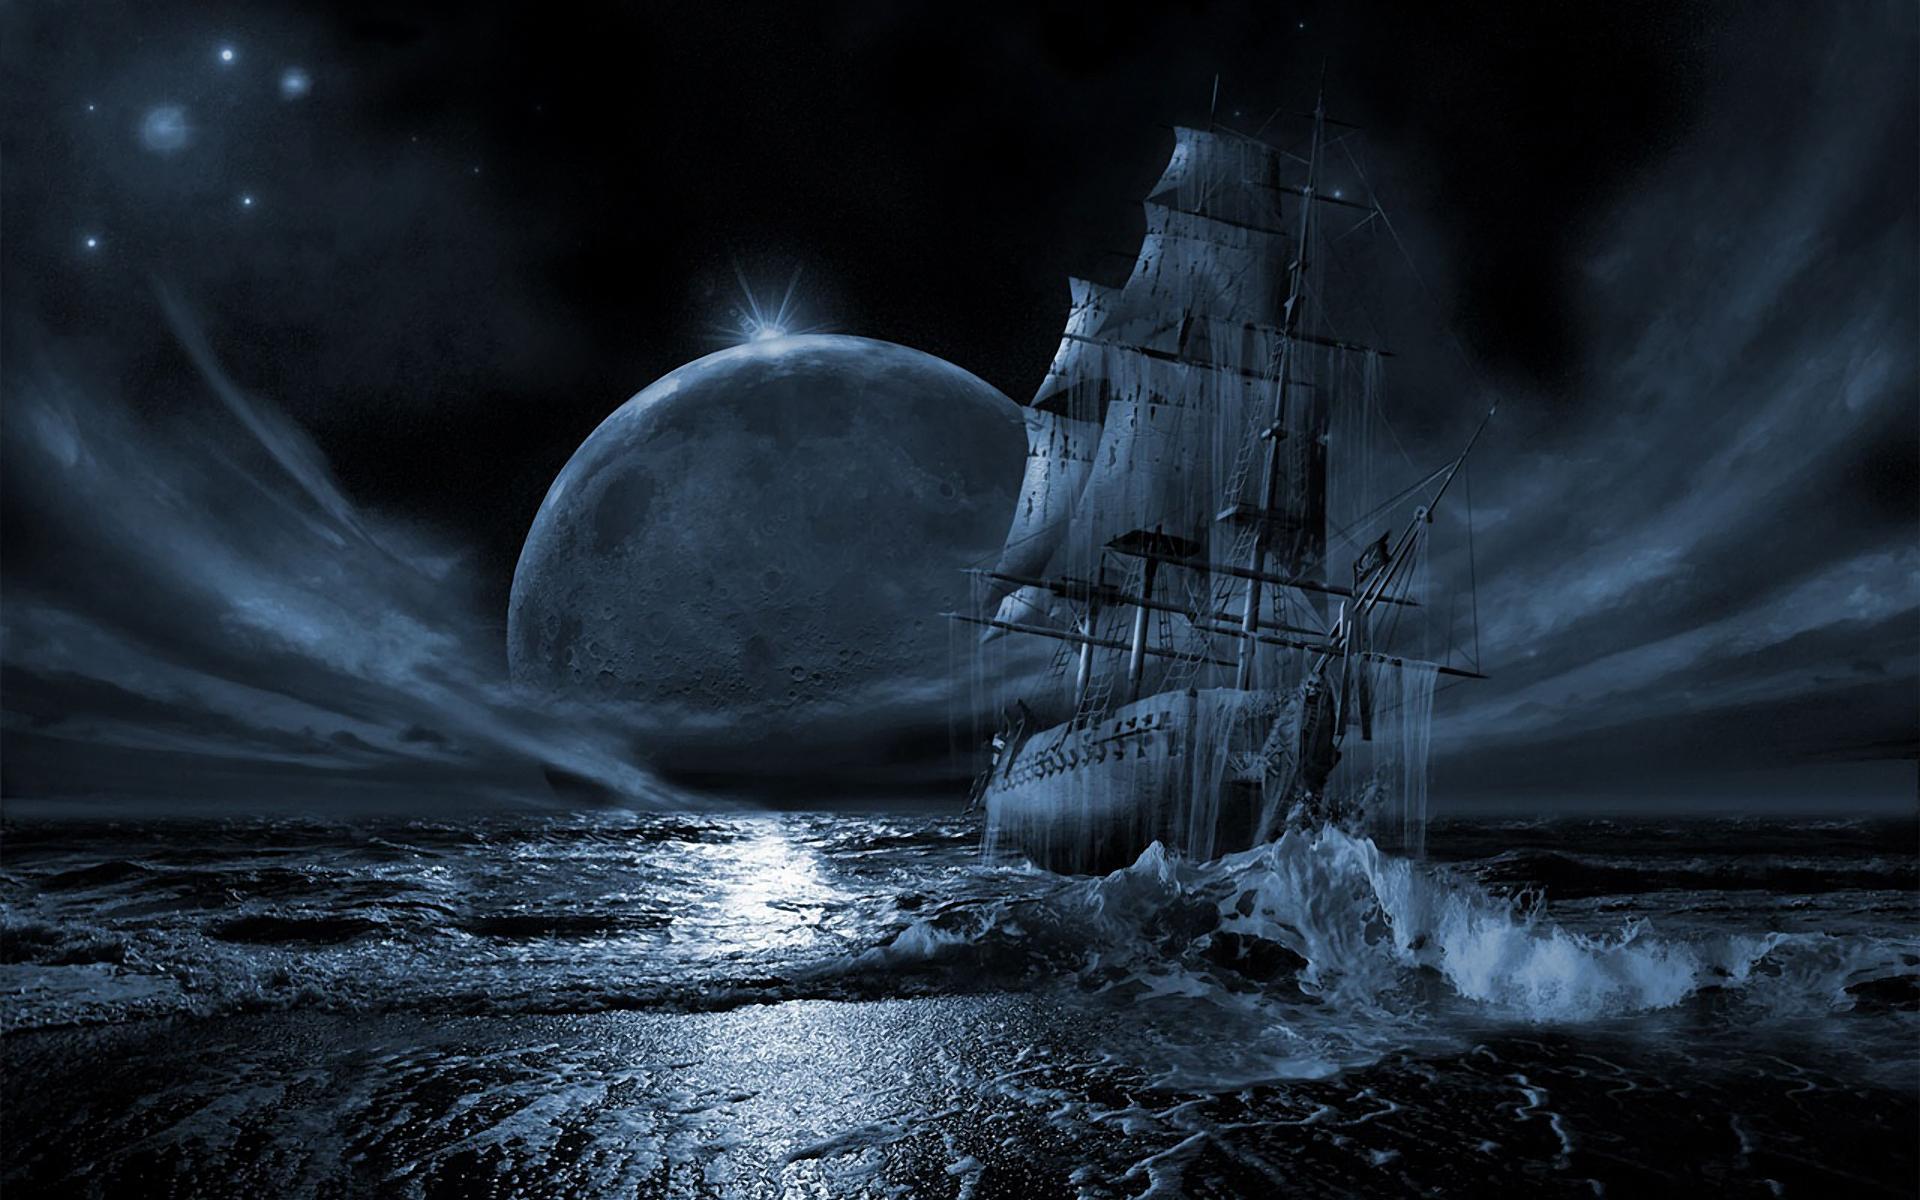 Free download Pirate Ship Live Wallpaper live background for Android APK [1920x1200] for your Desktop, Mobile & Tablet. Explore Live Pirate Wallpaper. Pirate Skull Wallpaper, Wallpaper Pirate, Pirate Wallpaper